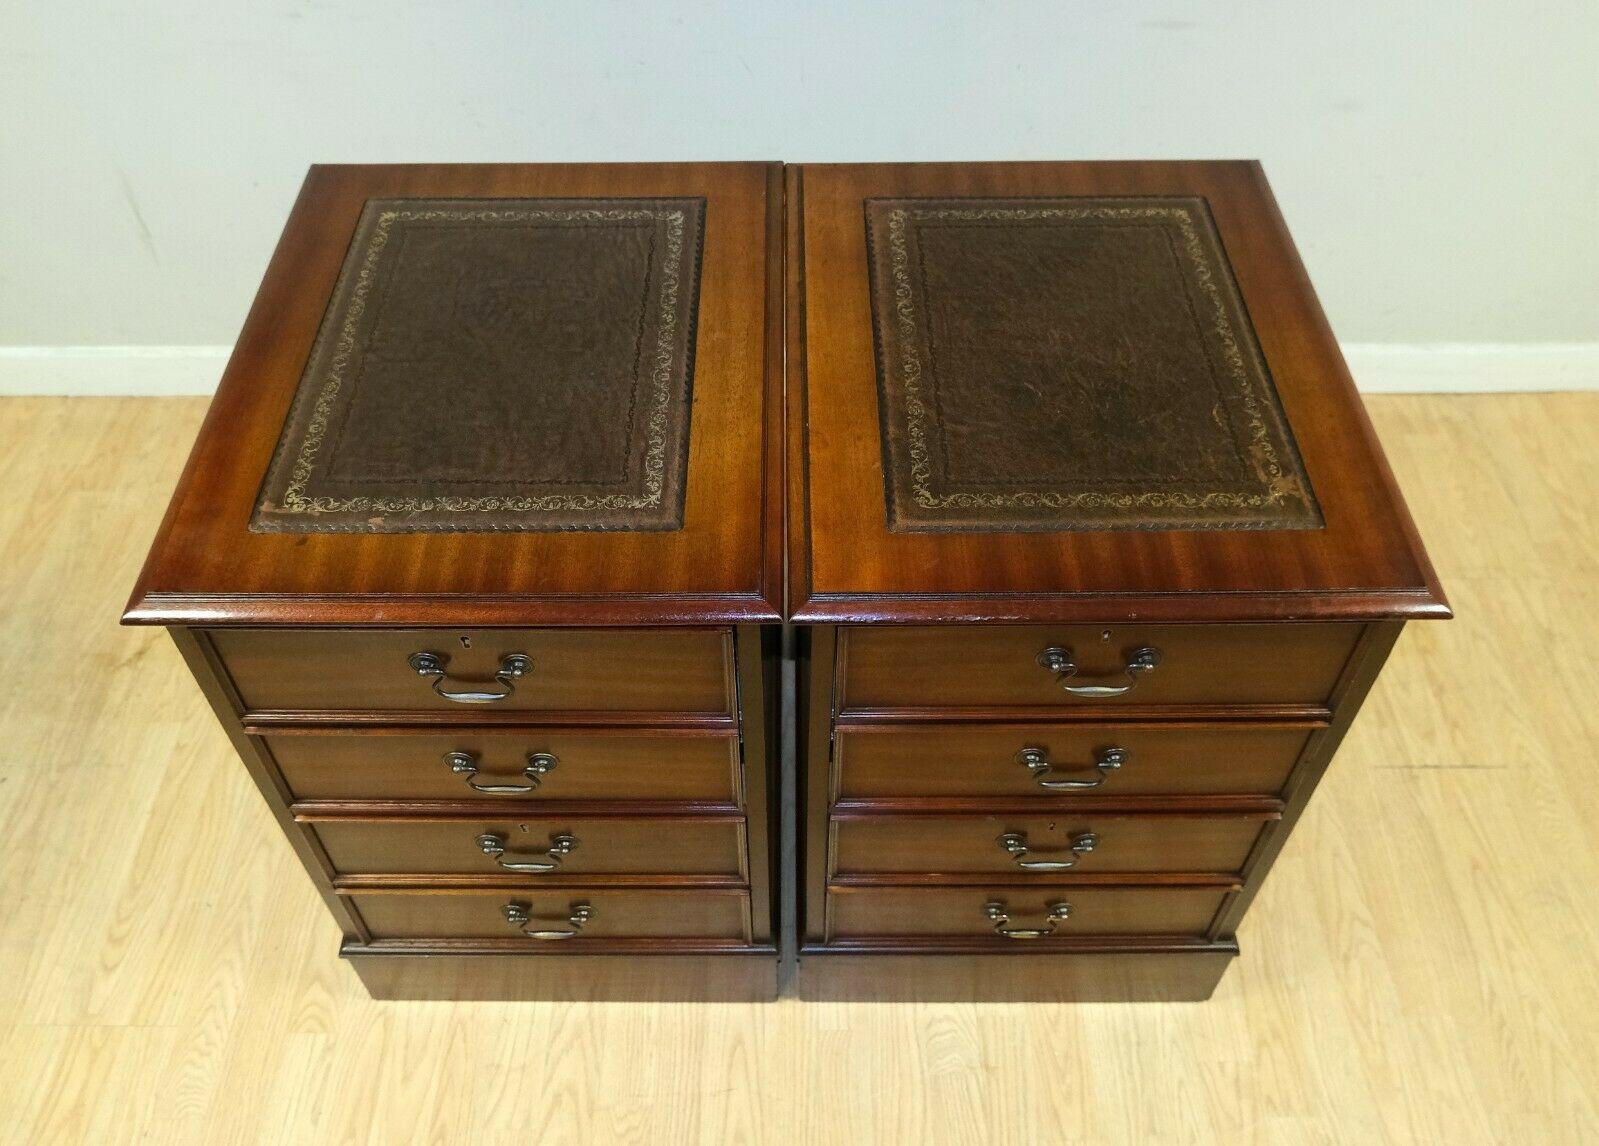 We are delighted to offer for sale this lovely pair of brown Mahogany cabinets with green leather top and gold leaf. 

This pair are a very good looking timeless pieces and very well made. The top leather and gold details make them easy to combine